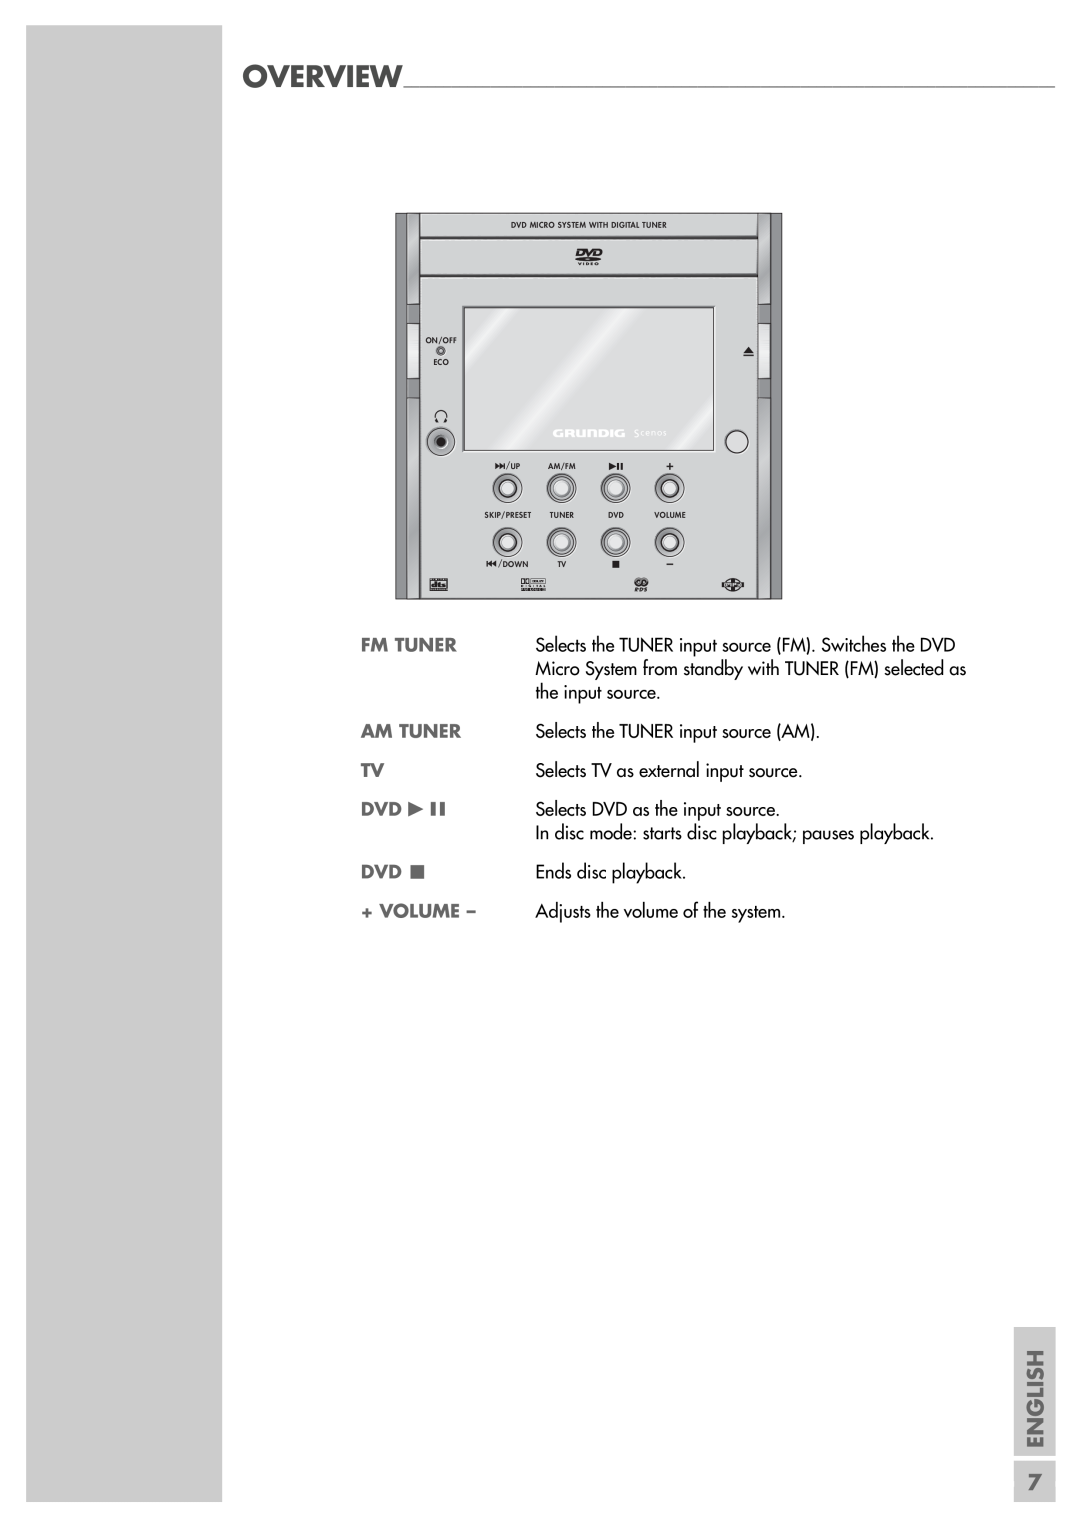 Grundig Scenos UMS 4400 DVD manual English, Selects the TUNER input source FM. Switches the DVD, Overview 